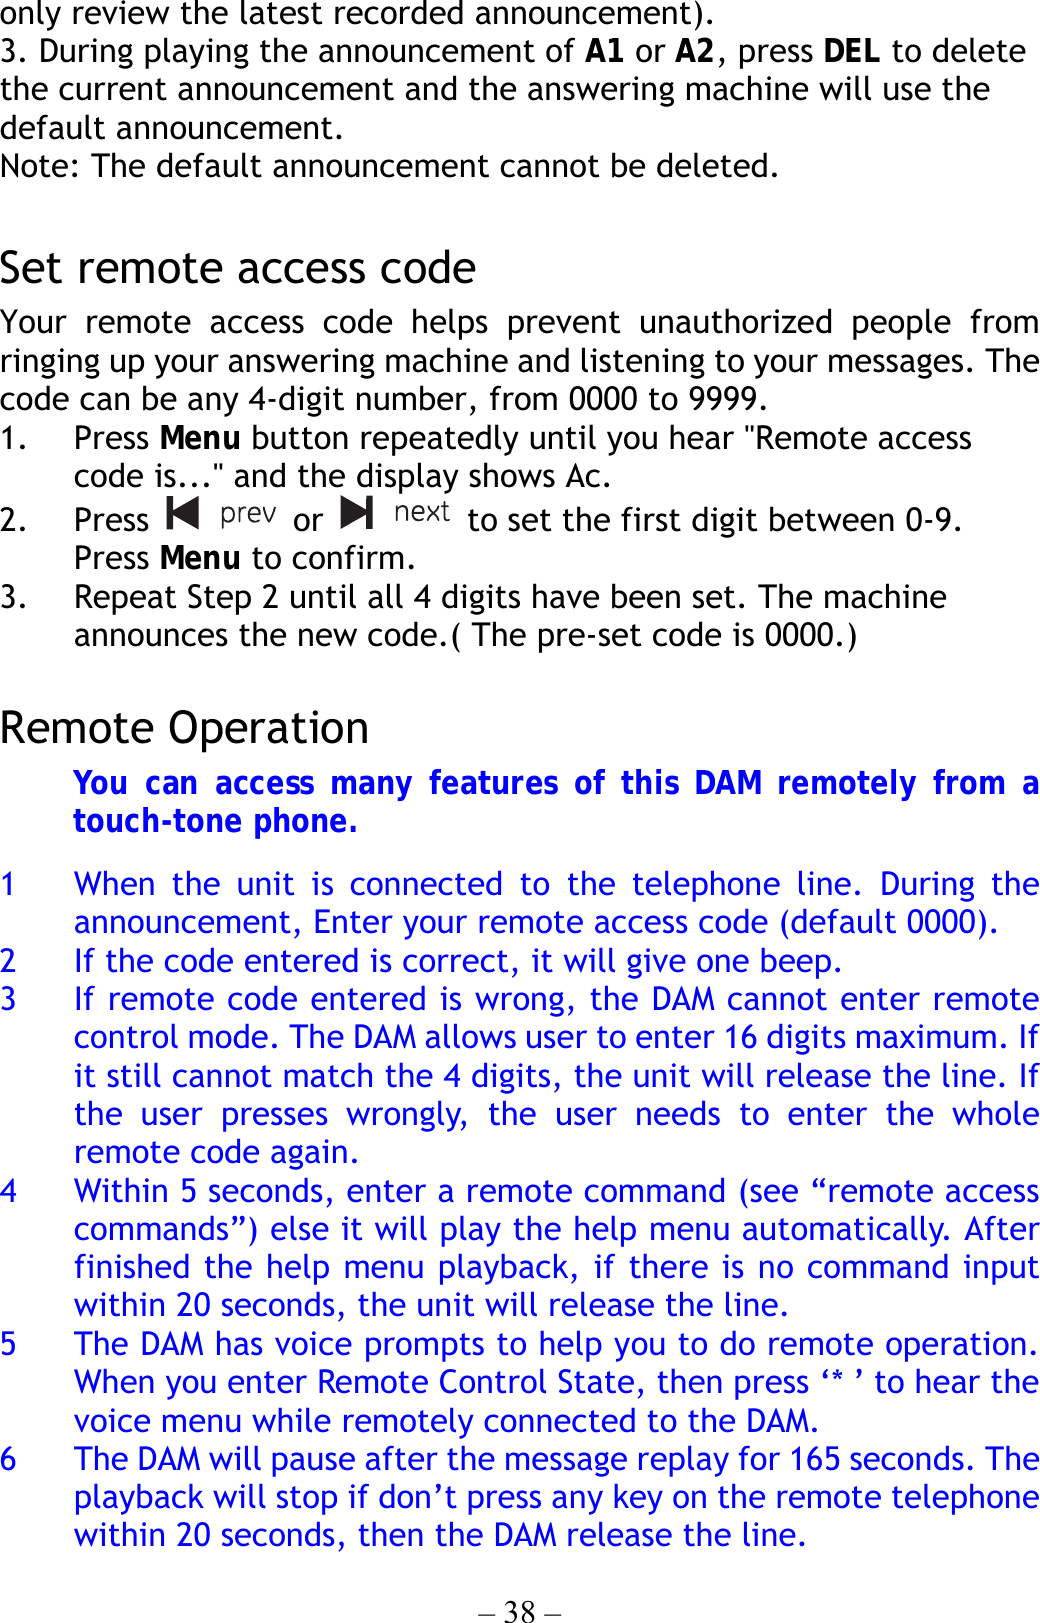 – 38 – only review the latest recorded announcement). 3. During playing the announcement of A1 or A2, press DEL to delete the current announcement and the answering machine will use the default announcement. Note: The default announcement cannot be deleted.  Set remote access code Your remote access code helps prevent unauthorized people from ringing up your answering machine and listening to your messages. The code can be any 4-digit number, from 0000 to 9999. 1. Press Menu button repeatedly until you hear &quot;Remote access code is...&quot; and the display shows Ac. 2. Press   or    to set the first digit between 0-9. Press Menu to confirm. 3.  Repeat Step 2 until all 4 digits have been set. The machine announces the new code.( The pre-set code is 0000.)  Remote Operation You can access many features of this DAM remotely from a touch-tone phone.  1  When the unit is connected to the telephone line. During the announcement, Enter your remote access code (default 0000). 2  If the code entered is correct, it will give one beep. 3  If remote code entered is wrong, the DAM cannot enter remote control mode. The DAM allows user to enter 16 digits maximum. If it still cannot match the 4 digits, the unit will release the line. If the user presses wrongly, the user needs to enter the whole remote code again. 4  Within 5 seconds, enter a remote command (see “remote access commands”) else it will play the help menu automatically. After finished the help menu playback, if there is no command input within 20 seconds, the unit will release the line. 5  The DAM has voice prompts to help you to do remote operation. When you enter Remote Control State, then press ‘* ’ to hear the voice menu while remotely connected to the DAM. 6  The DAM will pause after the message replay for 165 seconds. The playback will stop if don’t press any key on the remote telephone within 20 seconds, then the DAM release the line. 